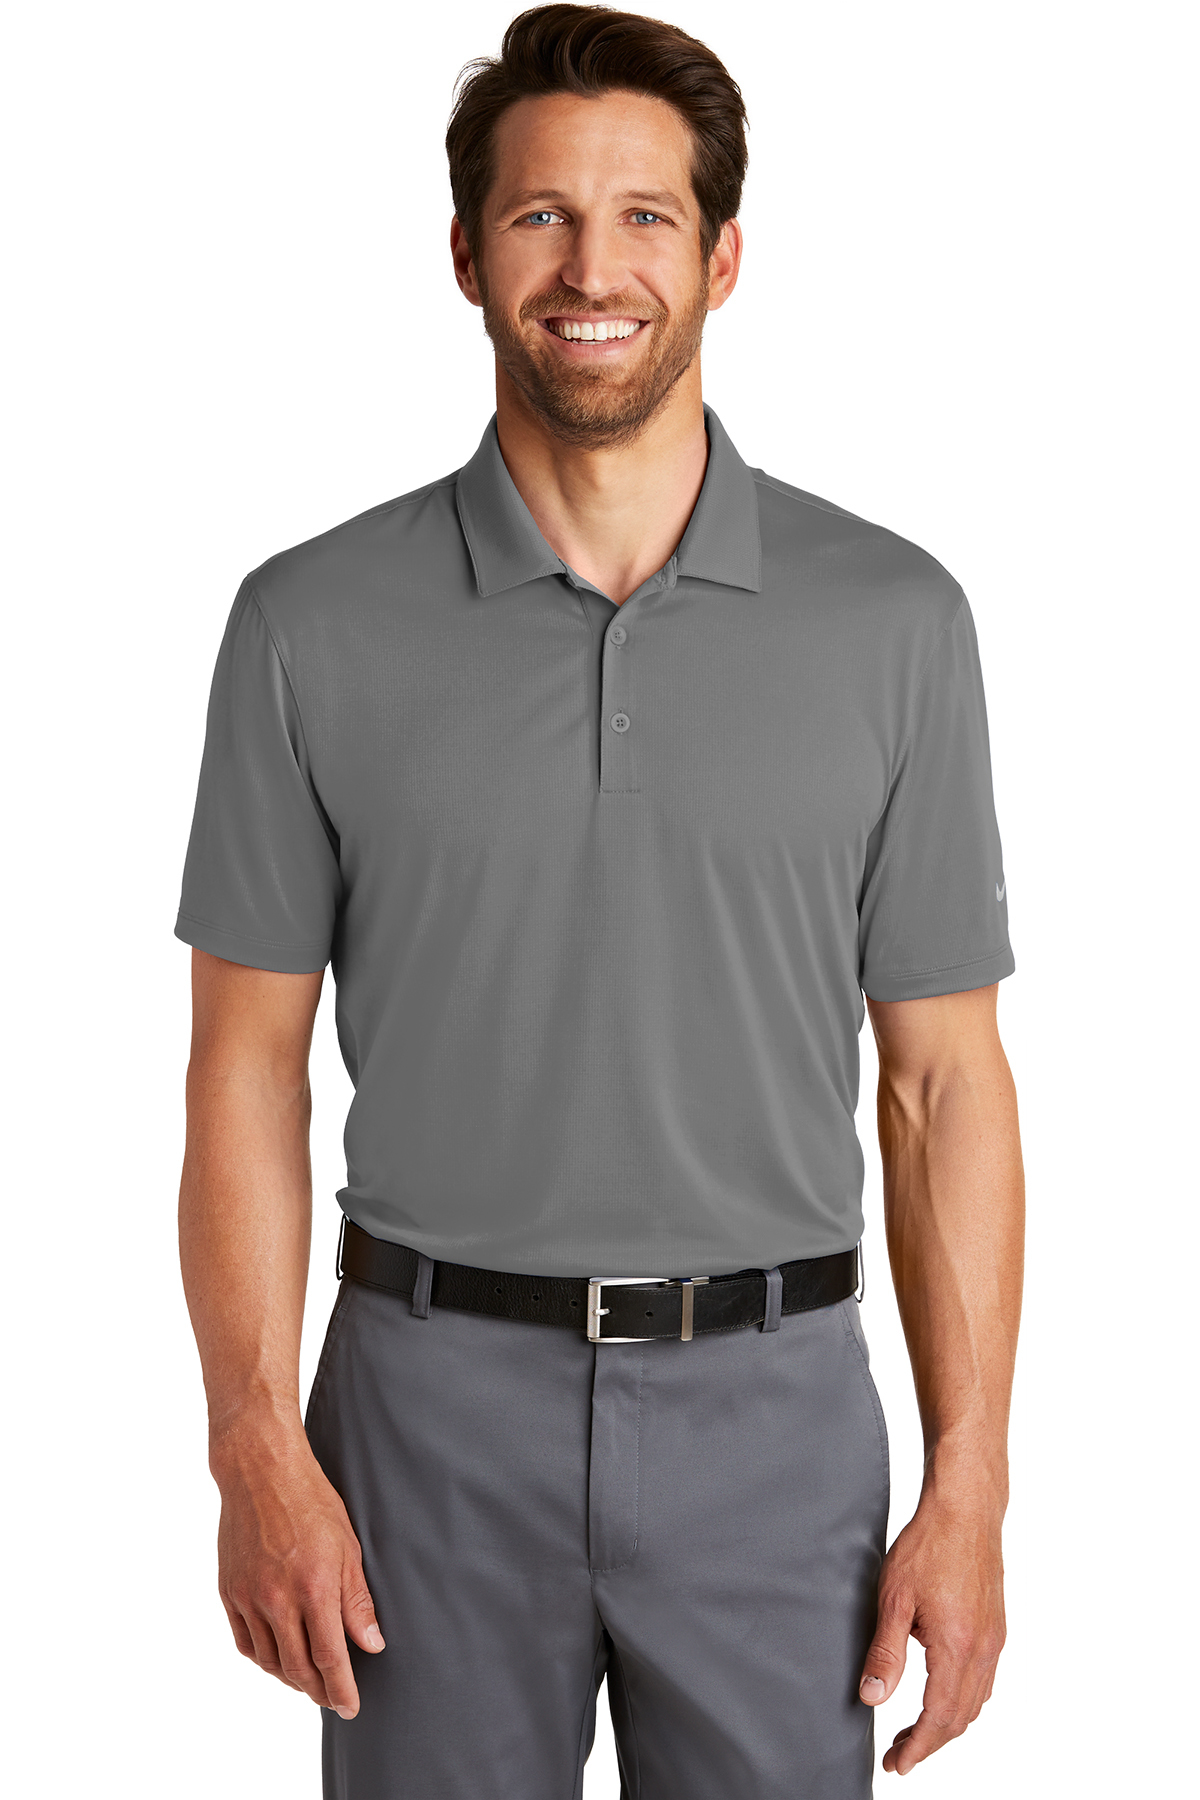 Nike Dri-FIT Legacy Polo | Product | Online Apparel Market